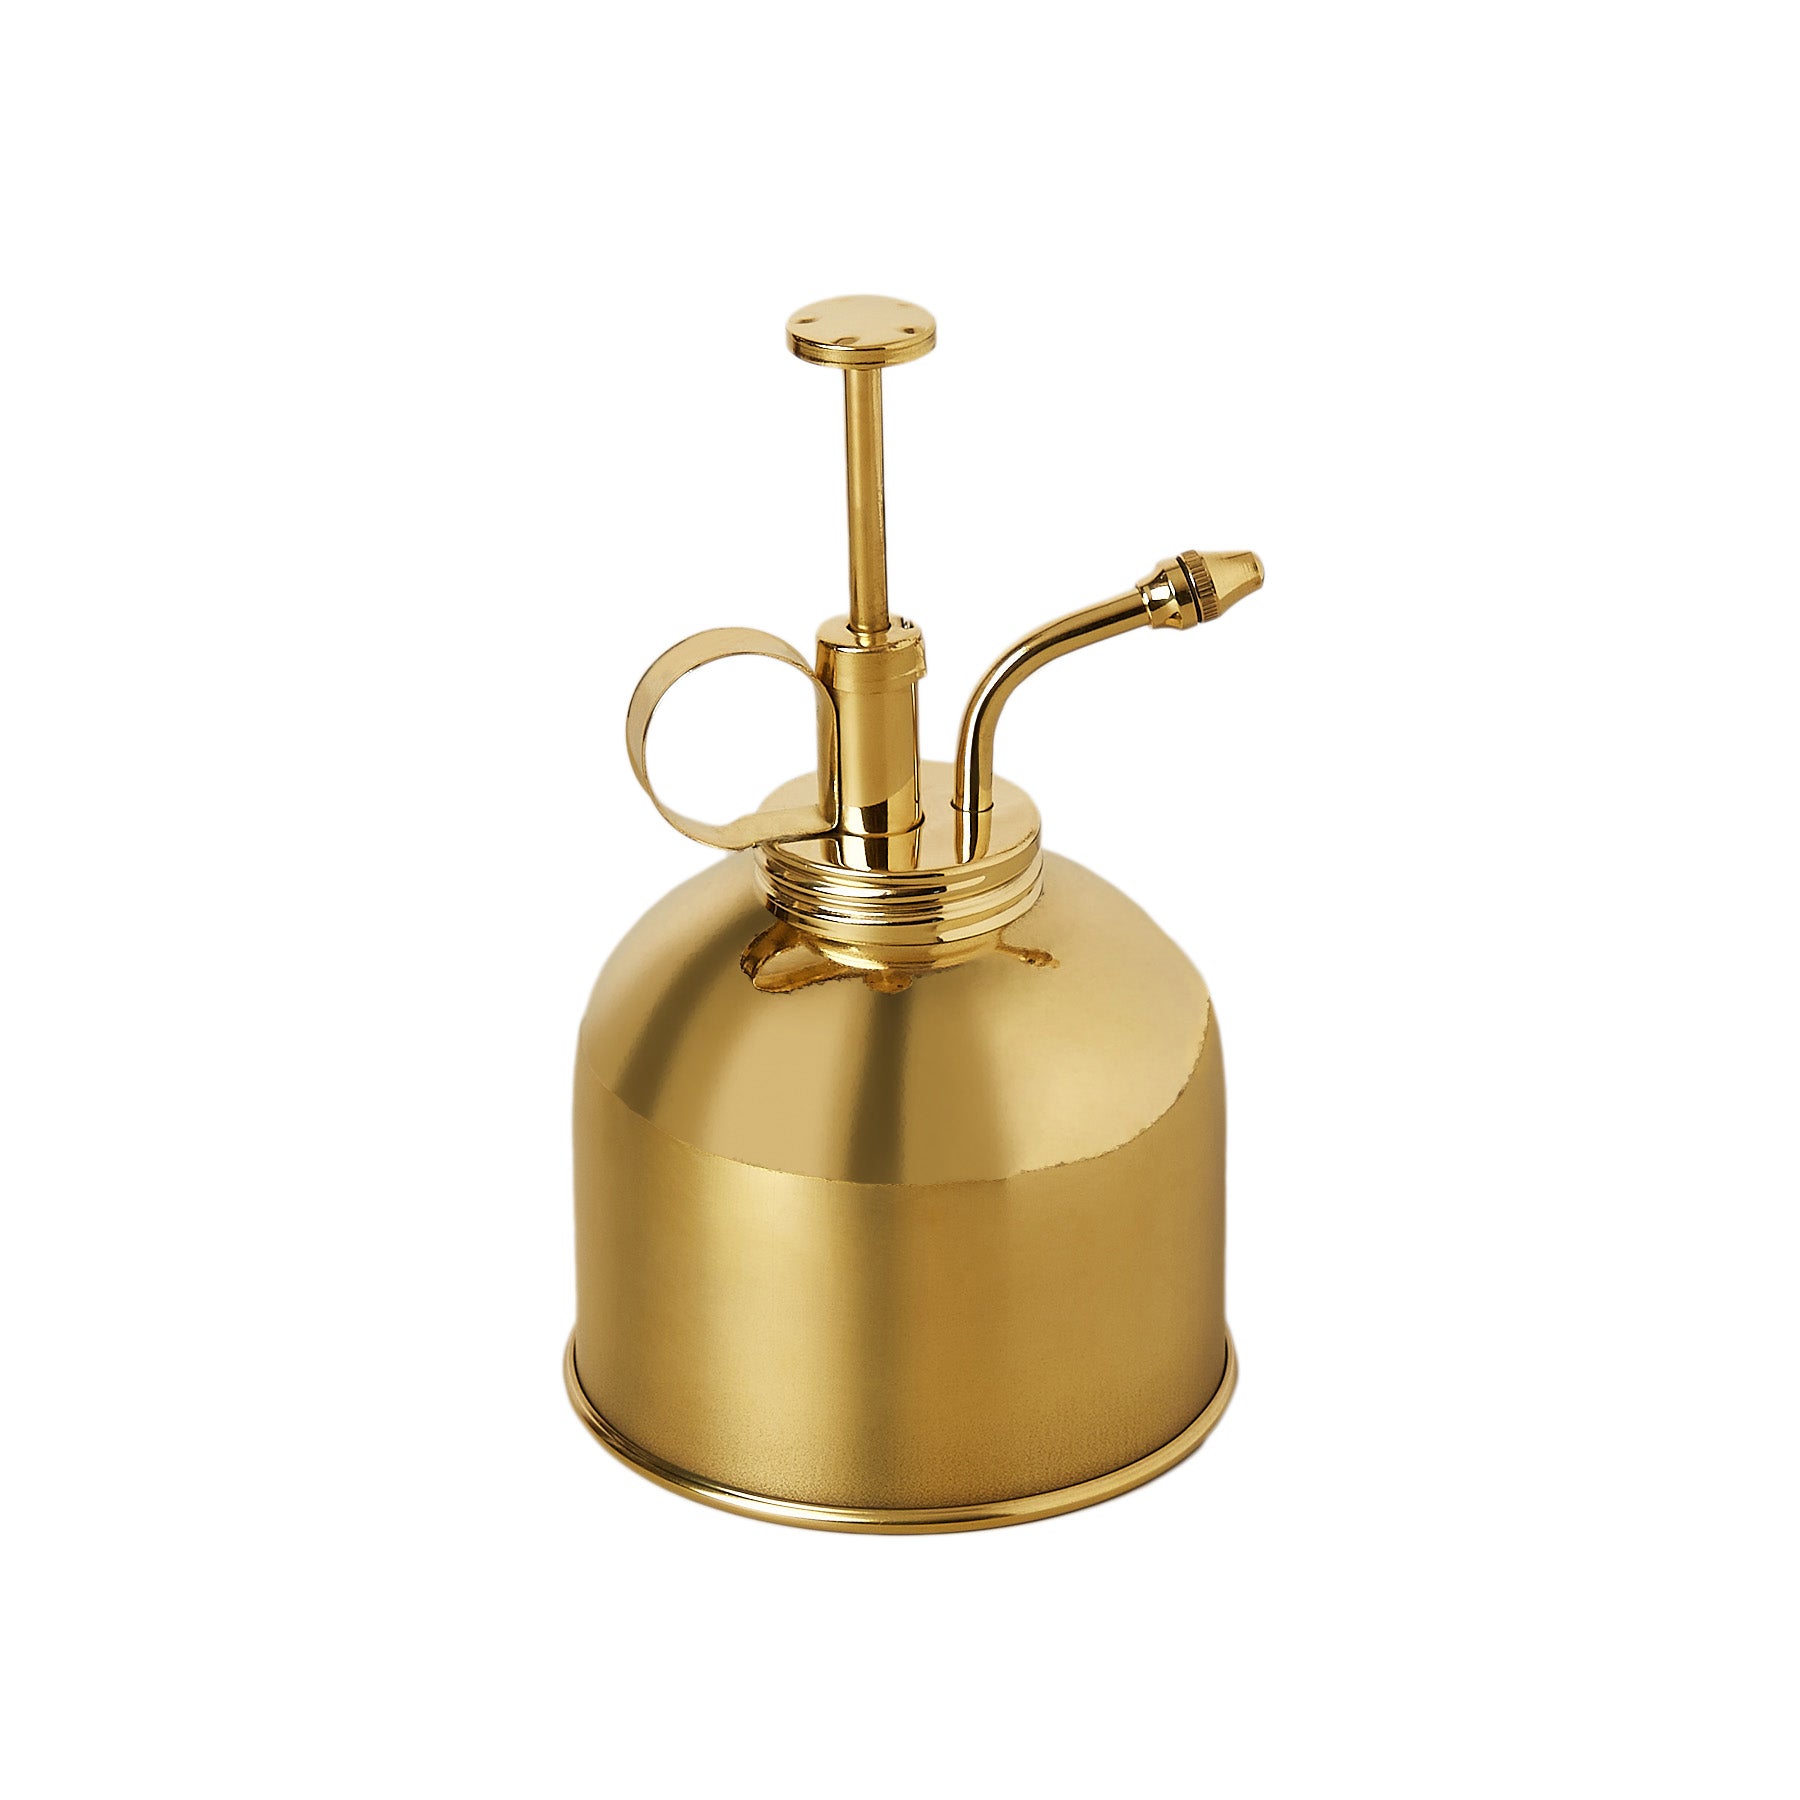 A small brass oil can on a white background at the best garden center near me.